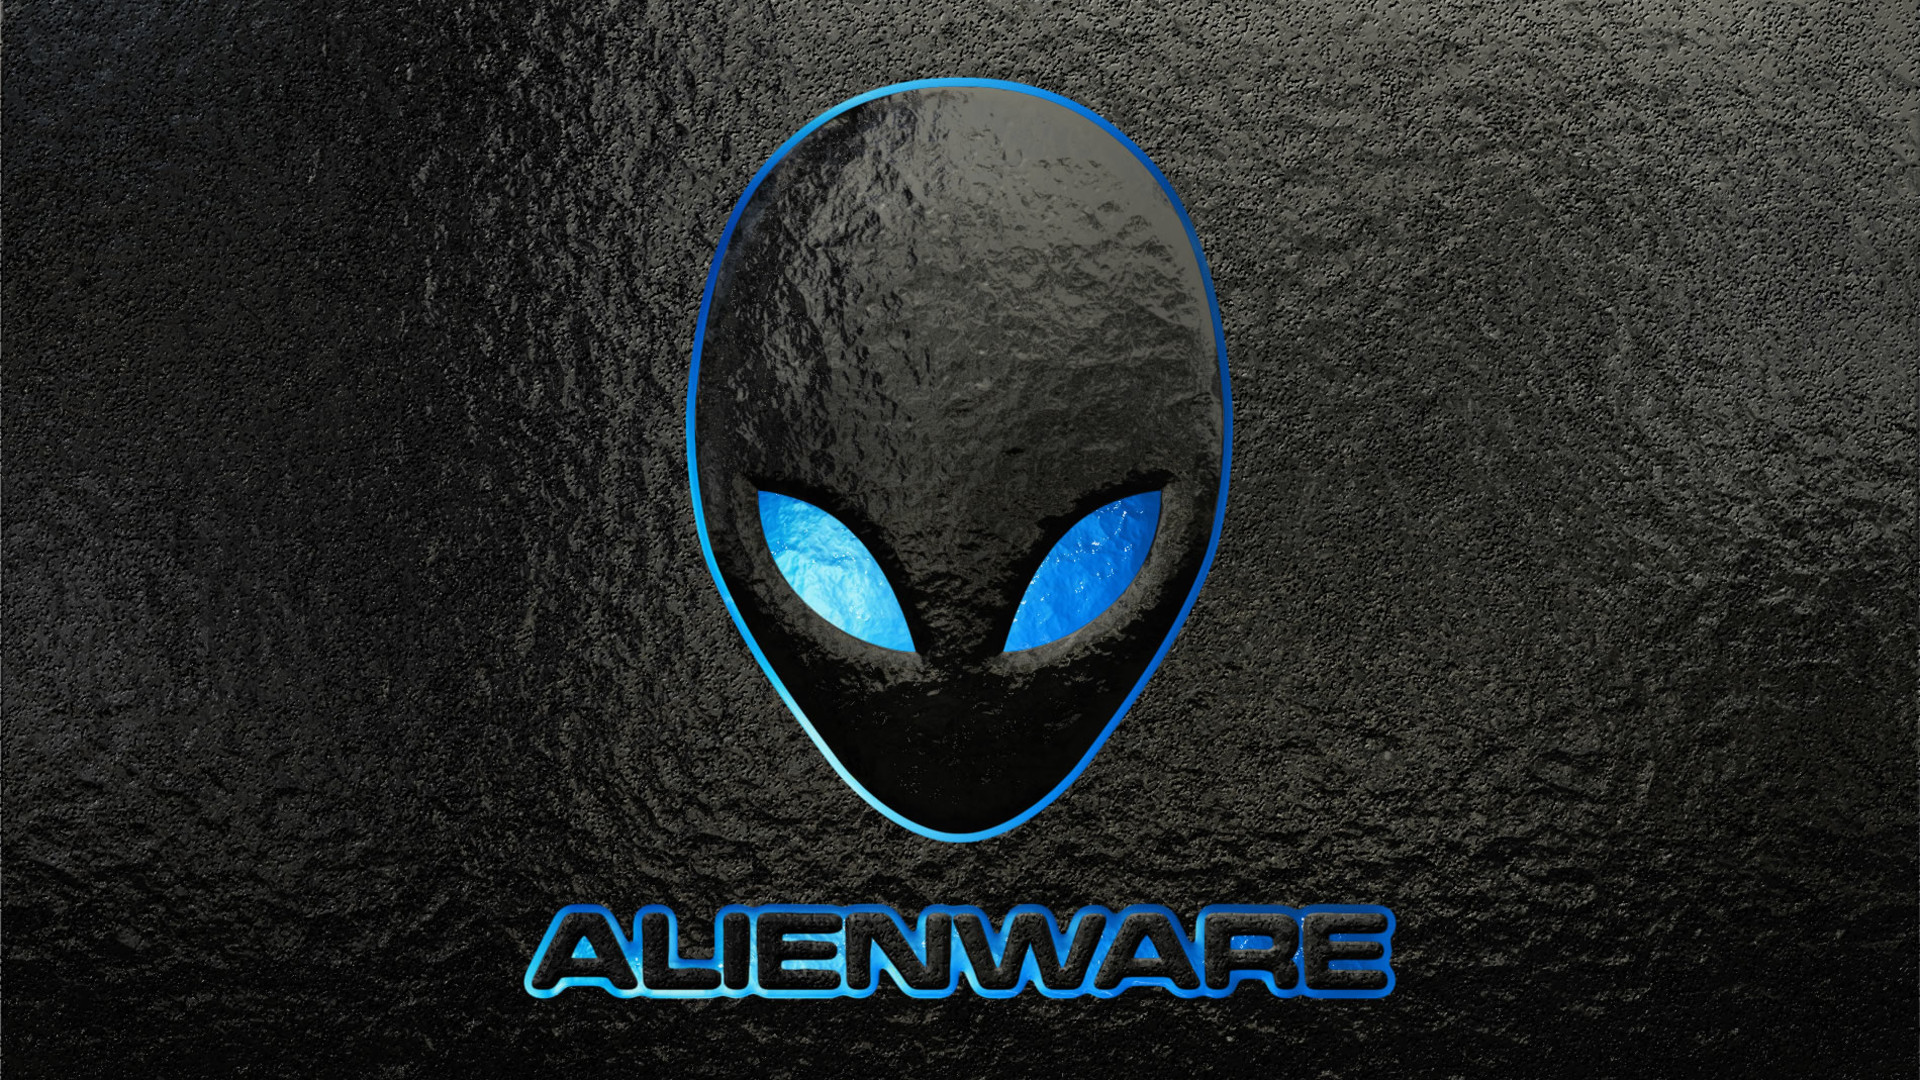 1920x1080 ... hd backgrounds alienware wallpapers cool 1080p windows wallpapers ...